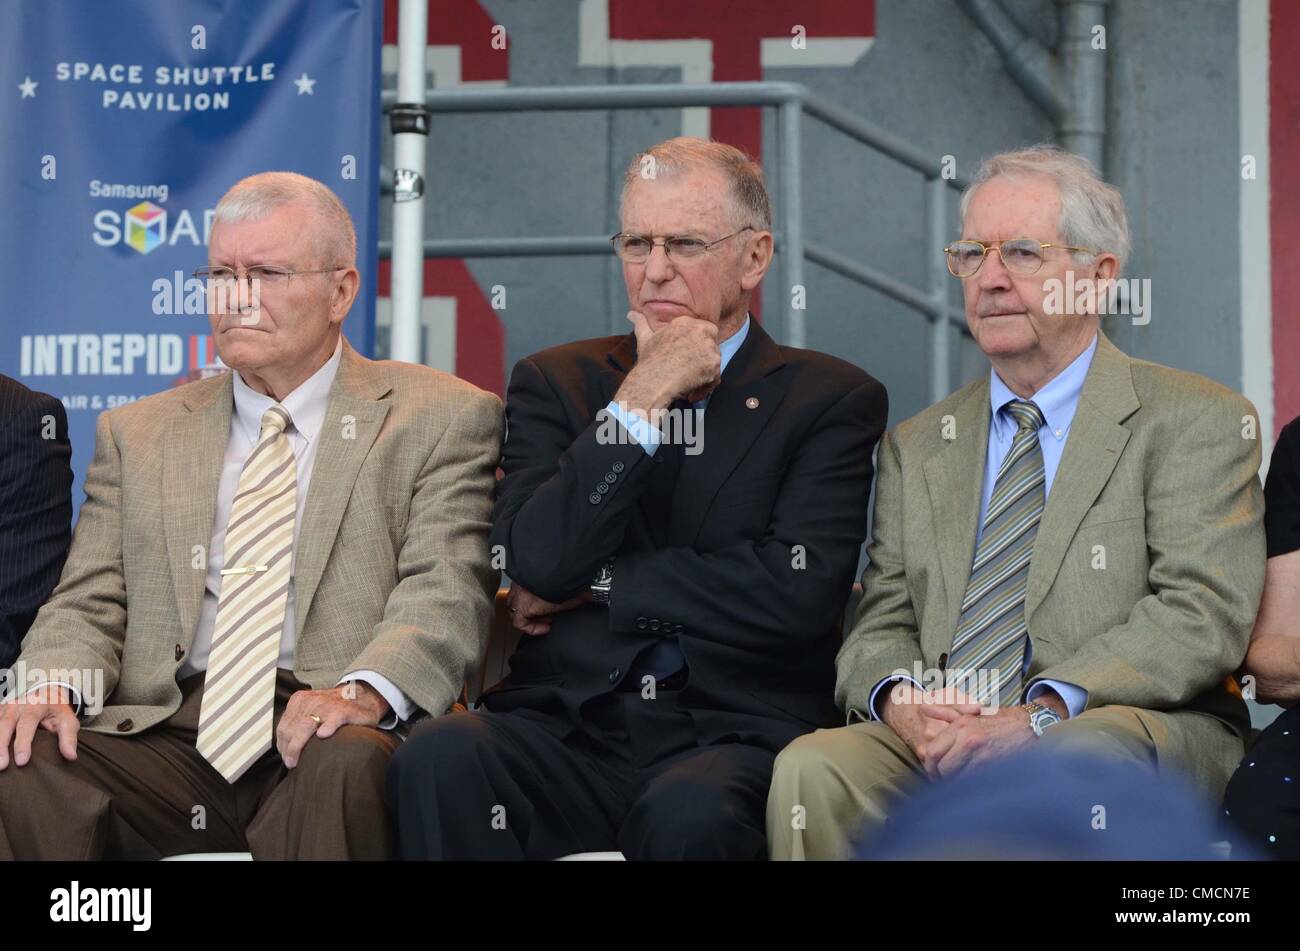 Thursday 19th July 2012. New York, USA. Fred Haise, Joe Engle, Richard Truly in attendance for Intrepid's Space Shuttle Enterprise Pavilion Grand Opening, The Intrepid Sea, Air and Space Museum, New York. Stock Photo